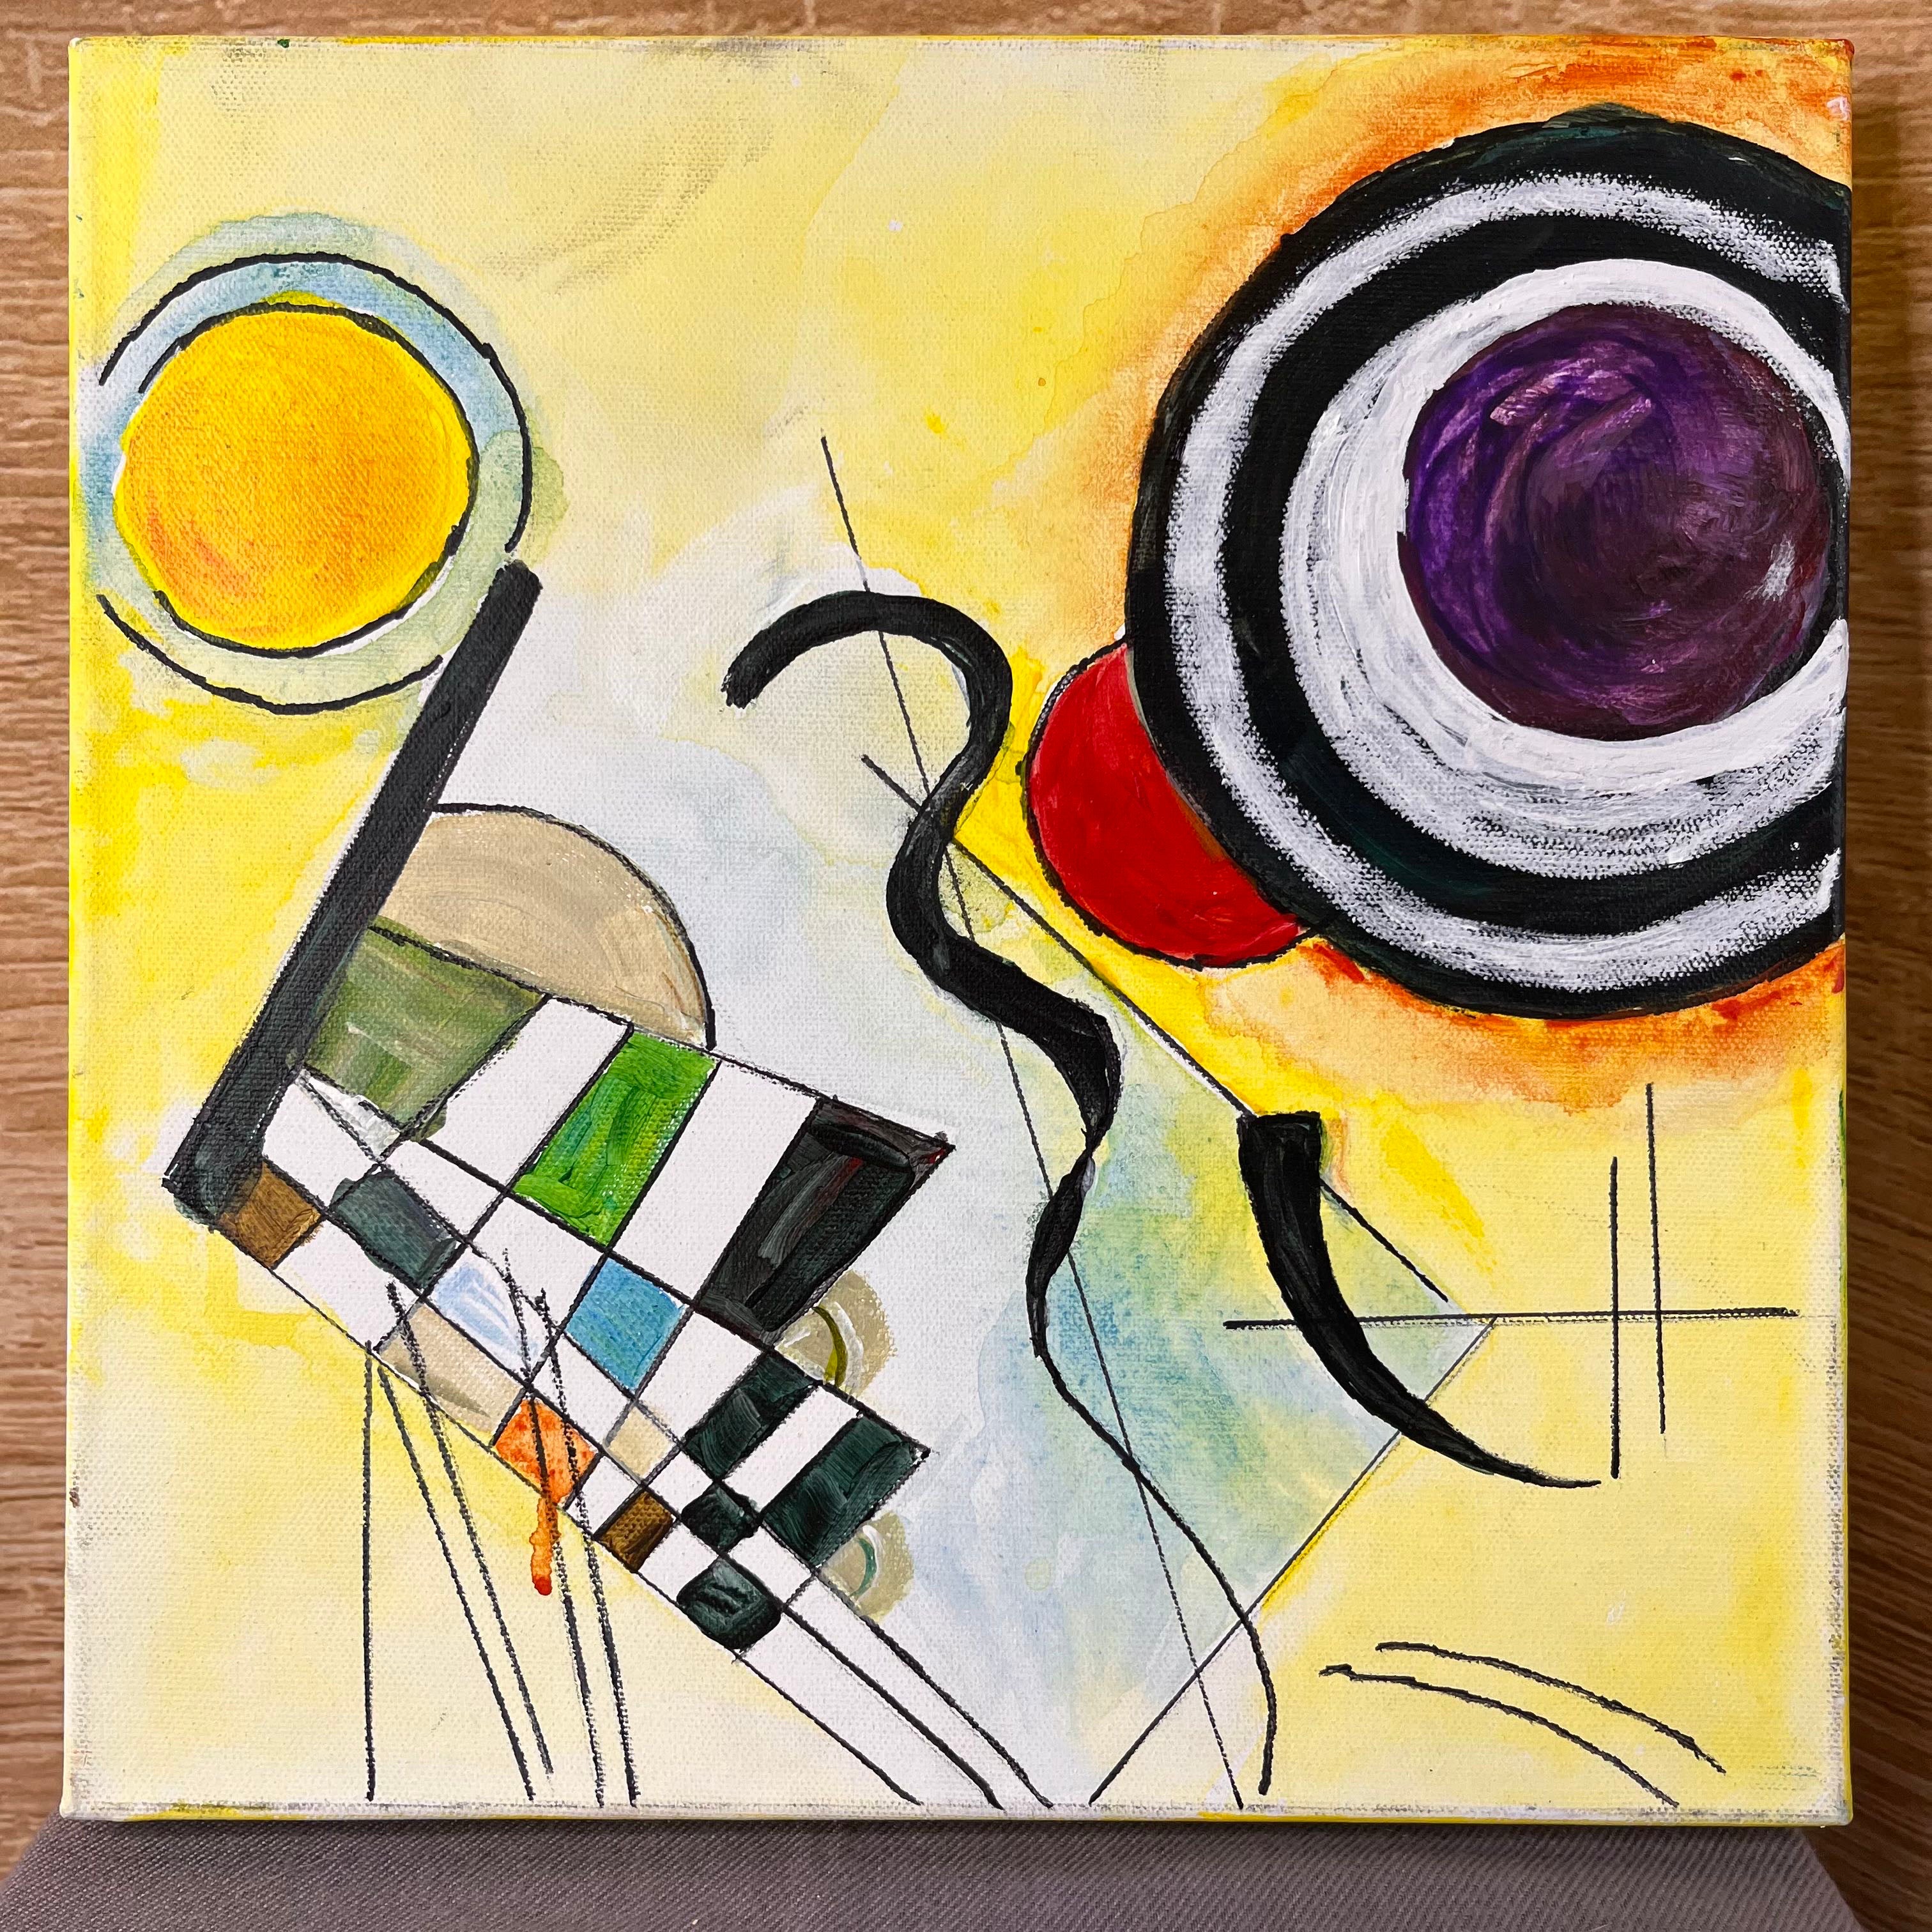 "Composition 8" Wassily Kandinsky 1923 Replica Painting on Canvas by Sue Binkley Tatum Wall Art